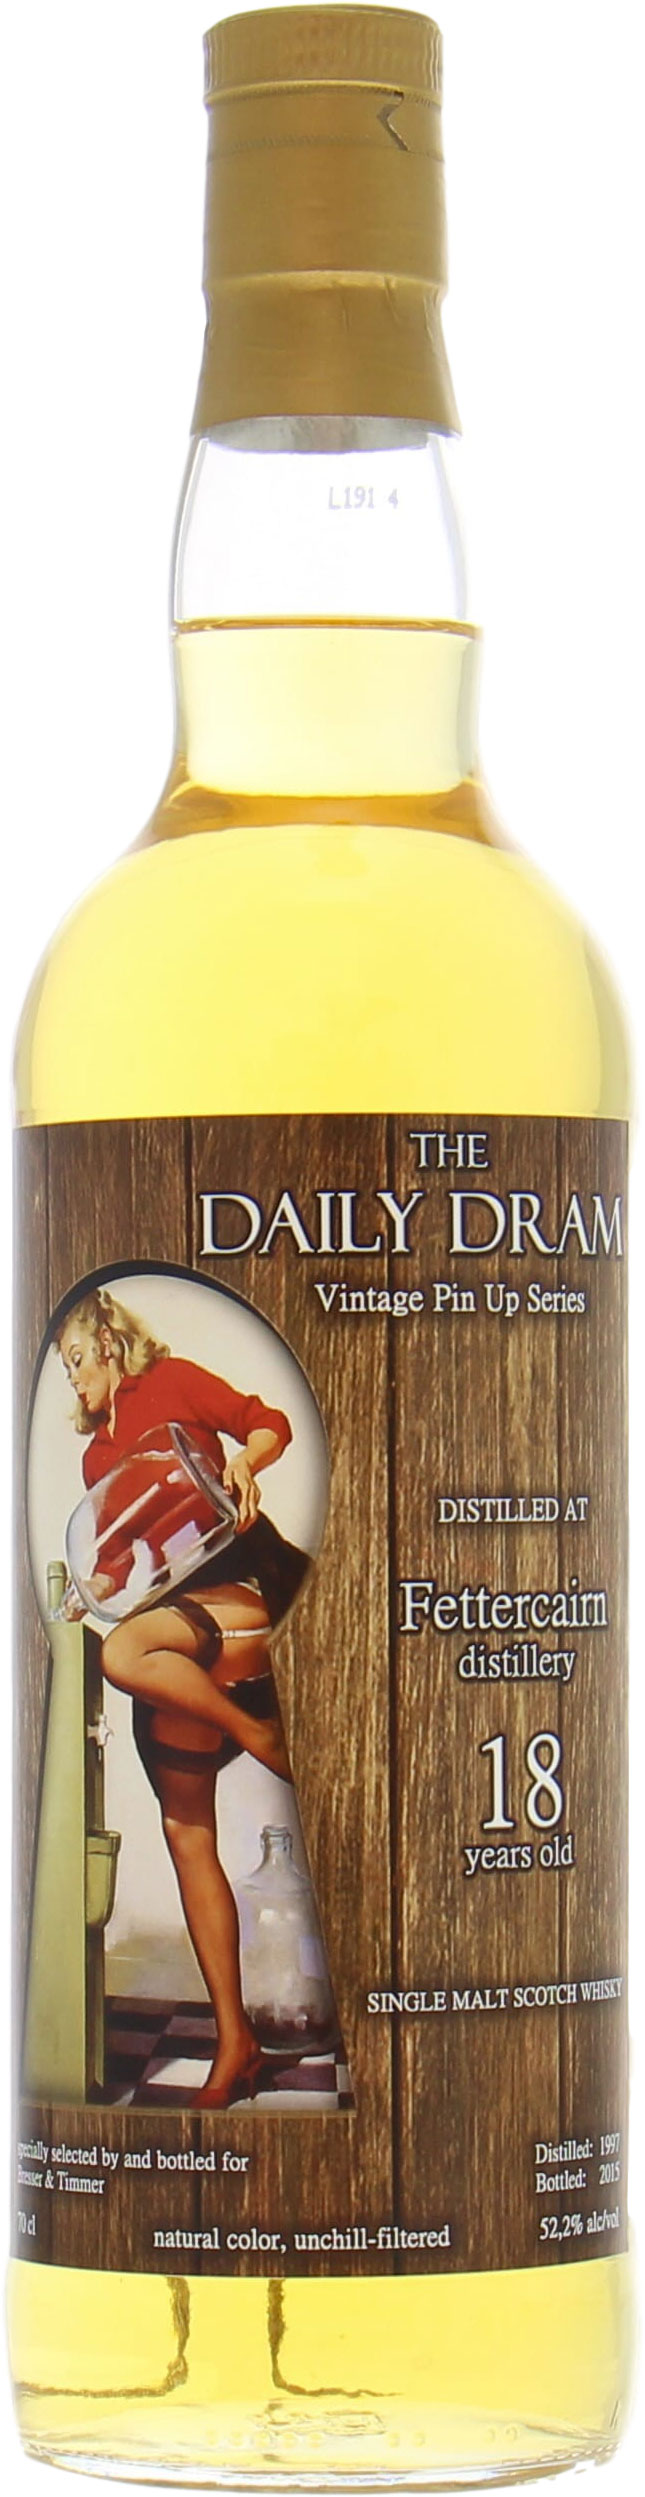 Fettercairn - 18 Years Old  Daily Dram Vintage Pin Up Series 52.2% 1997 Perfect